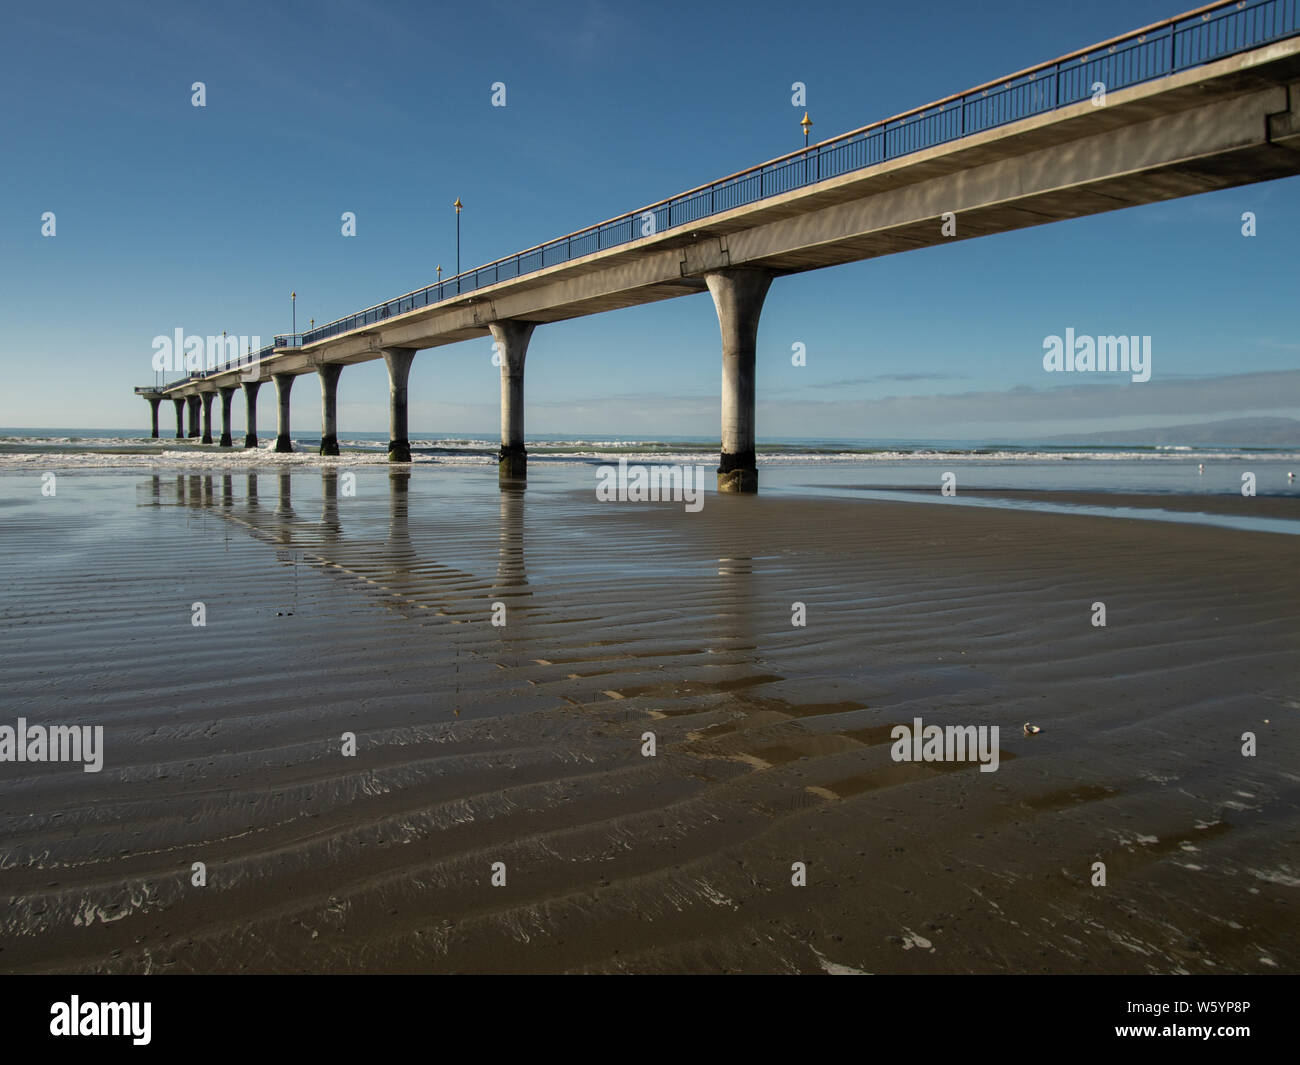 New Brighton pier reflected in the wet sand of New Brighton beach, New Zealand Stock Photo